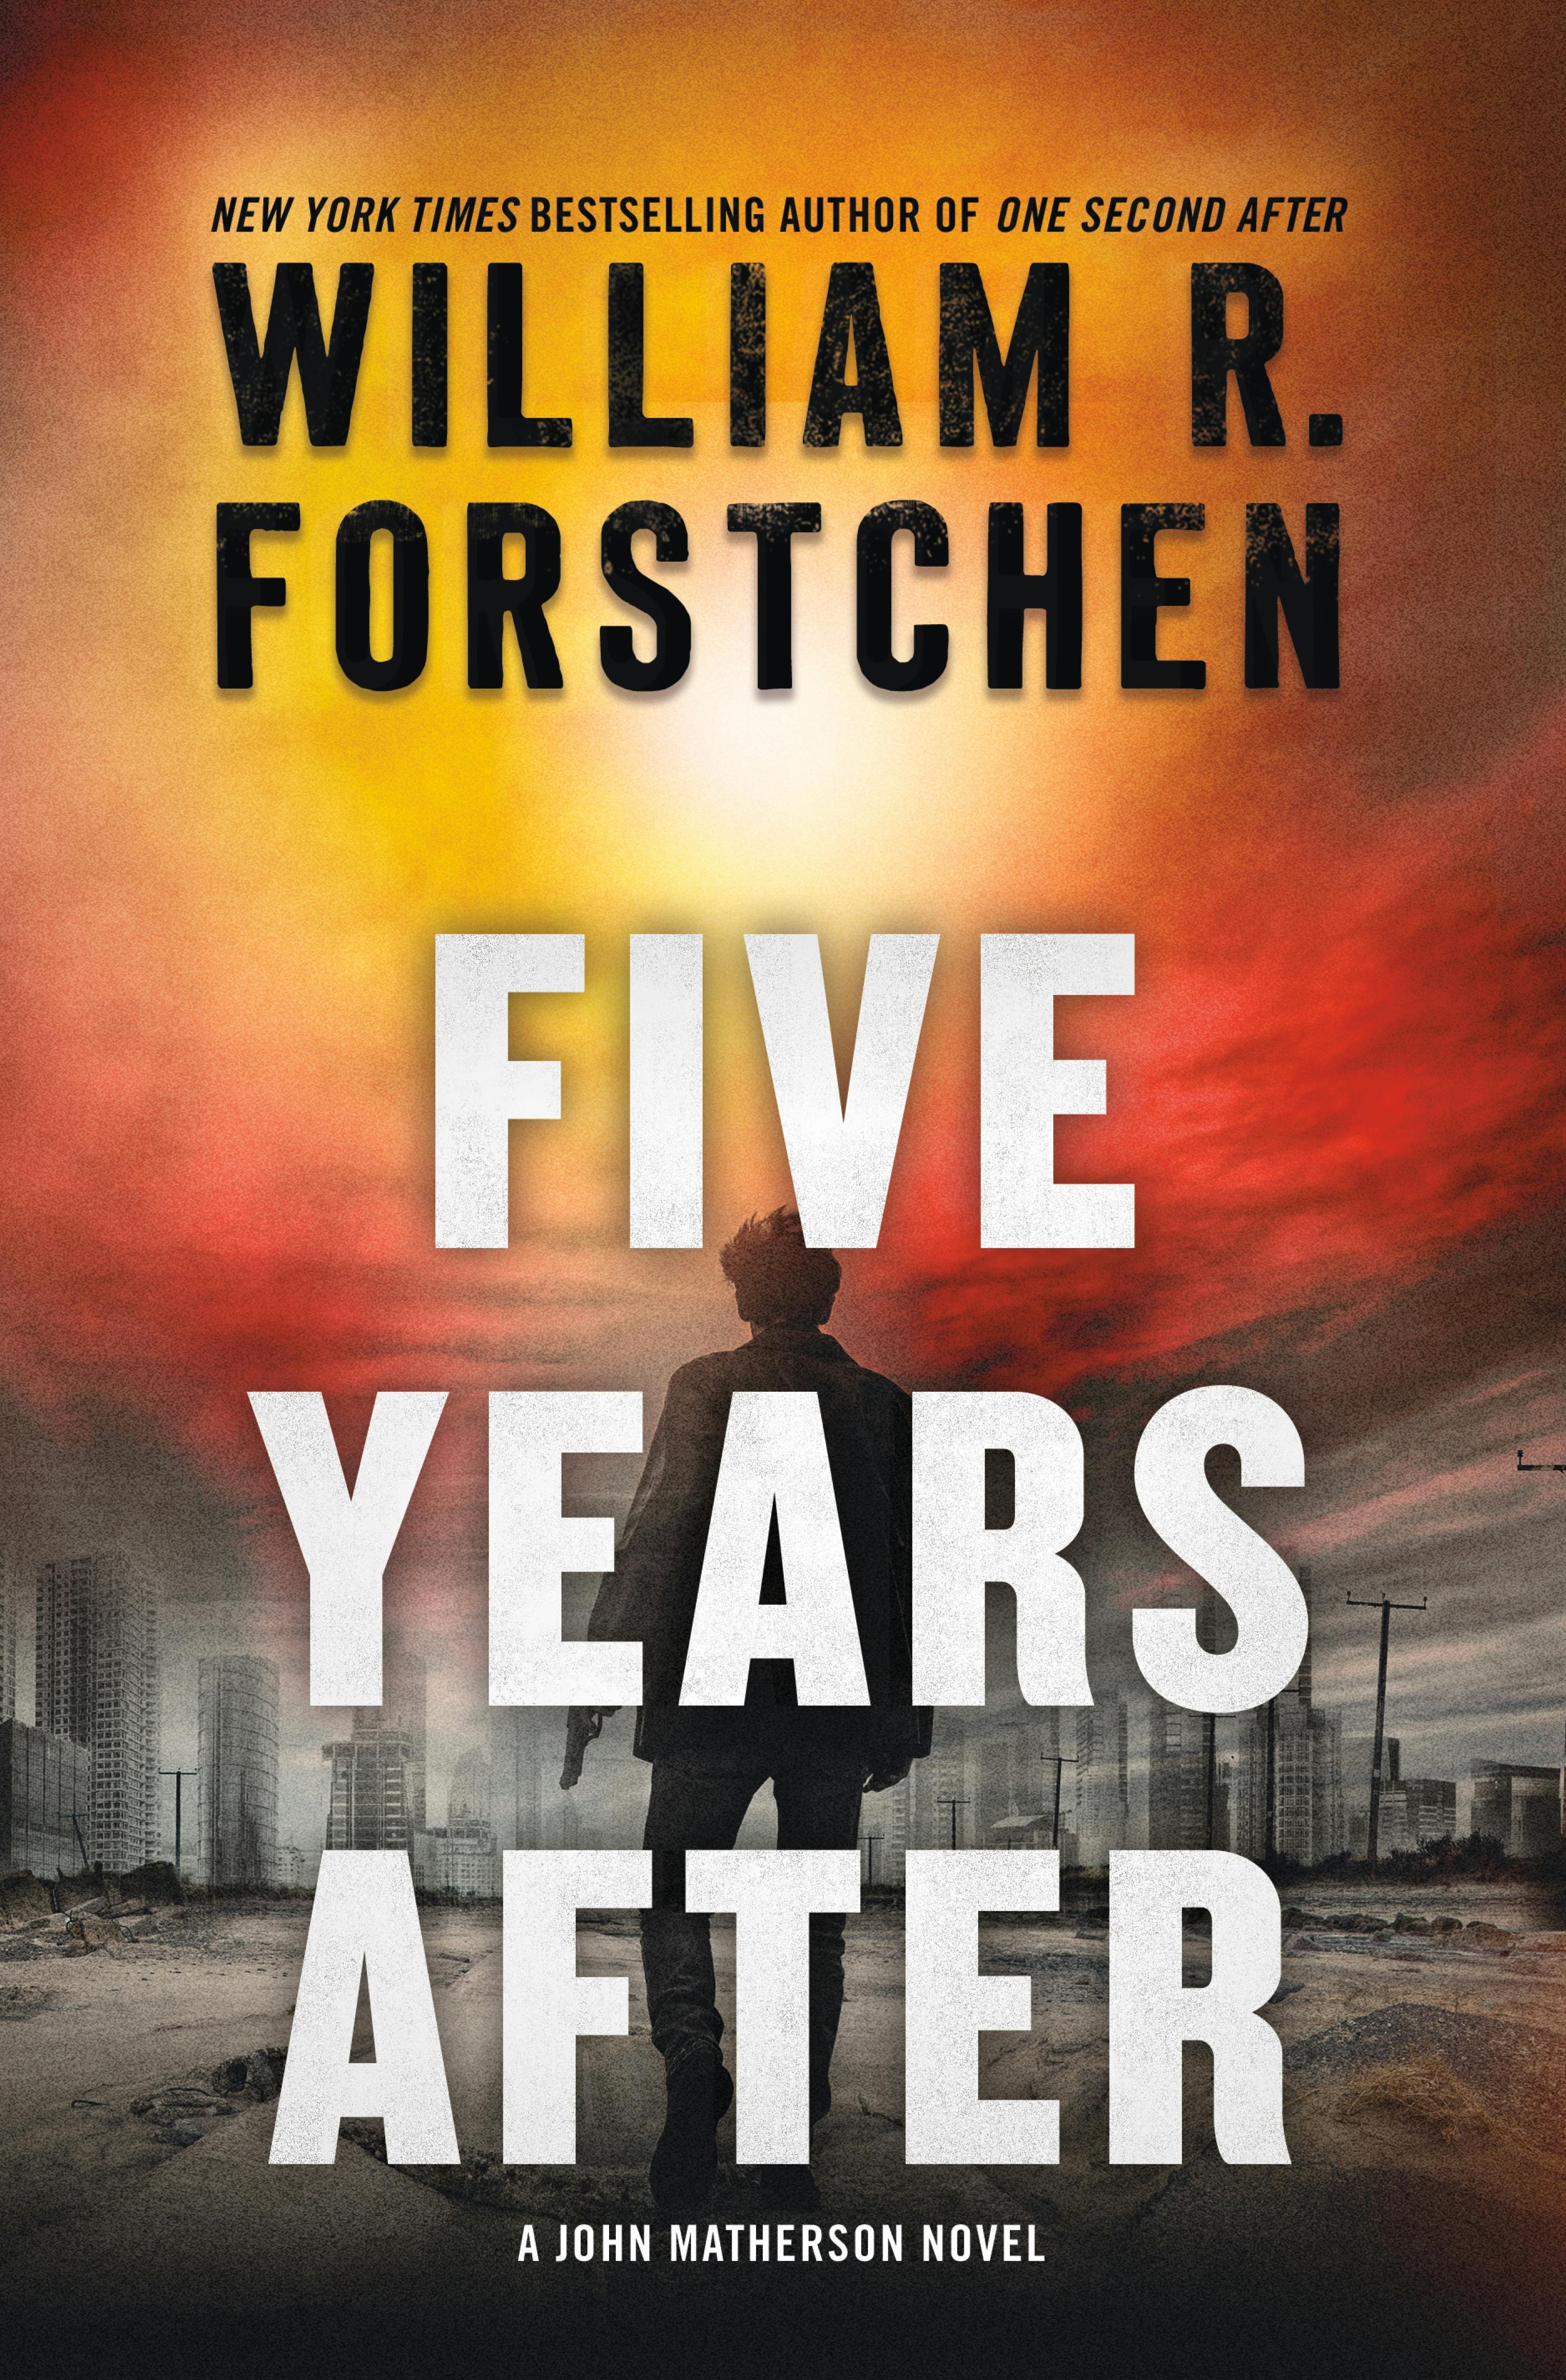 Cover for the book titled as: Five Years After